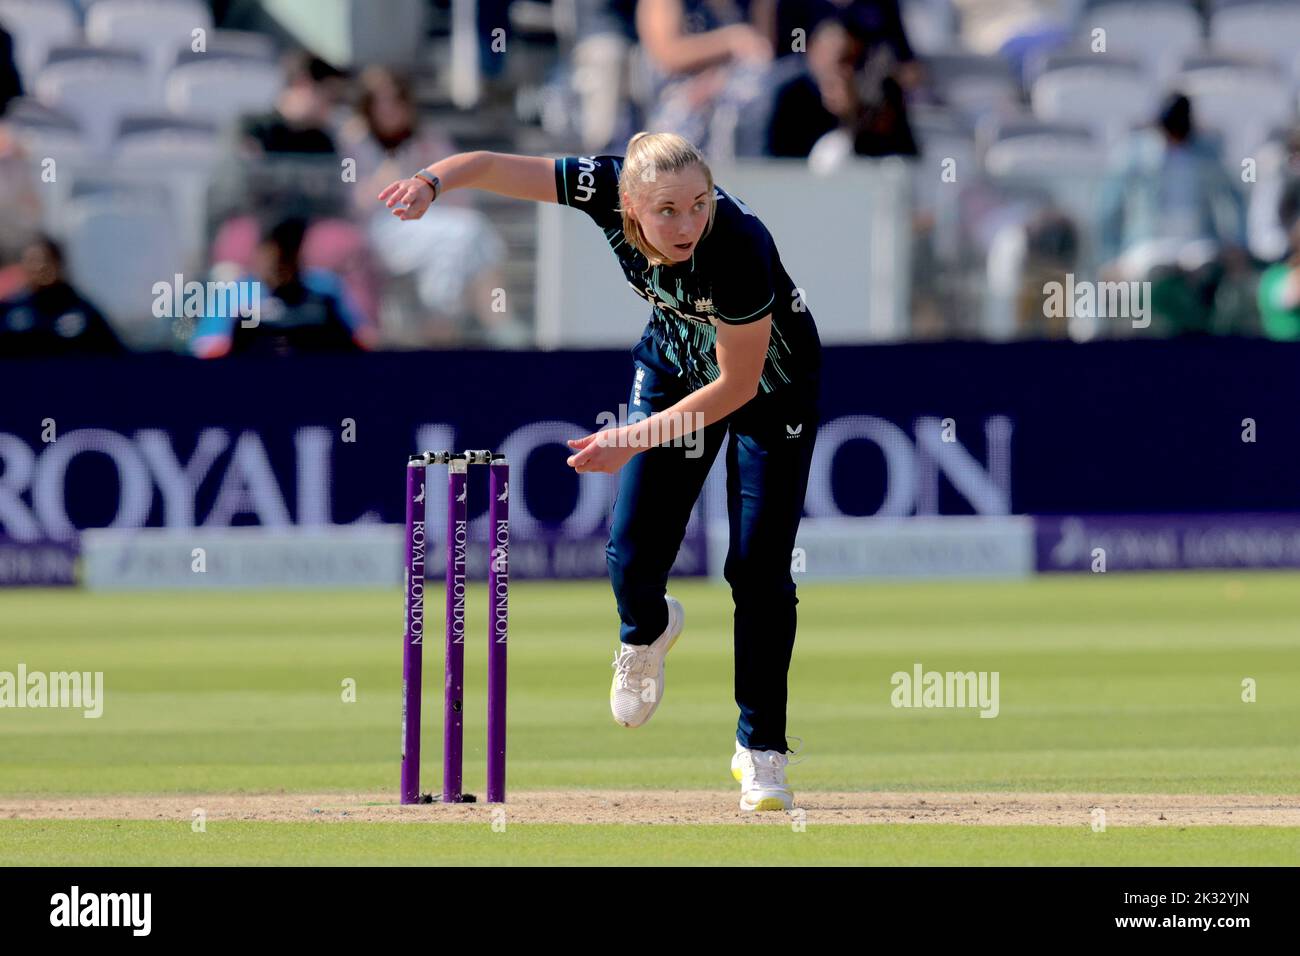 London, UK. 24 September 2022.  England’s Freya Kemp bowling as England women take on India in the 3rd Royal London One Day International at Lords. David Rowe/Alamy Live News. Stock Photo